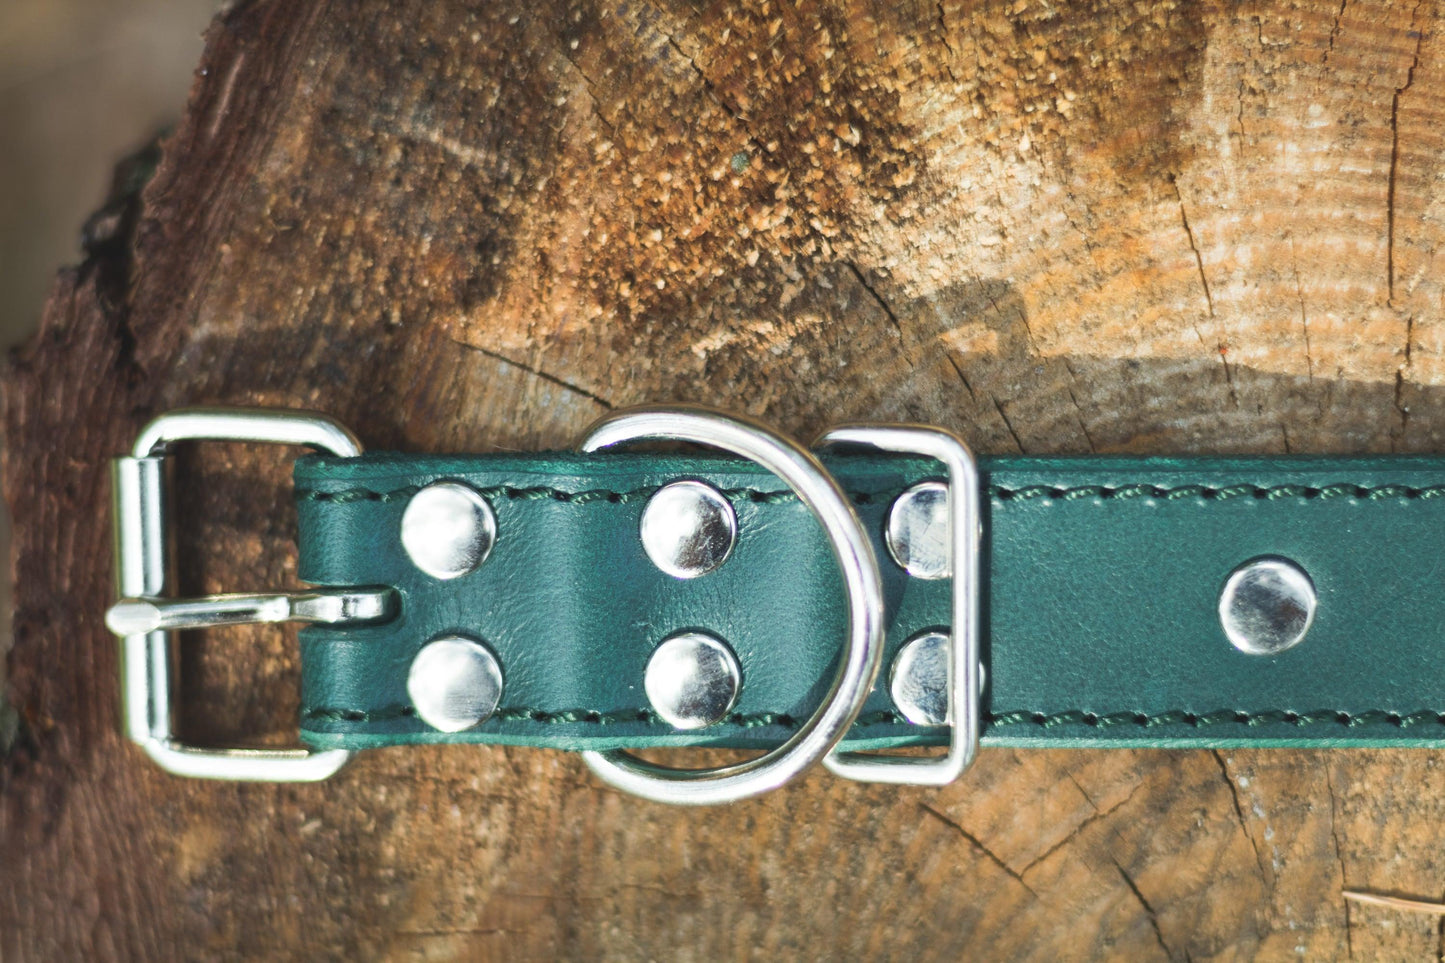 Handmade green leather STUDDED dog collar - European handmade dog accessories by My Wild Other